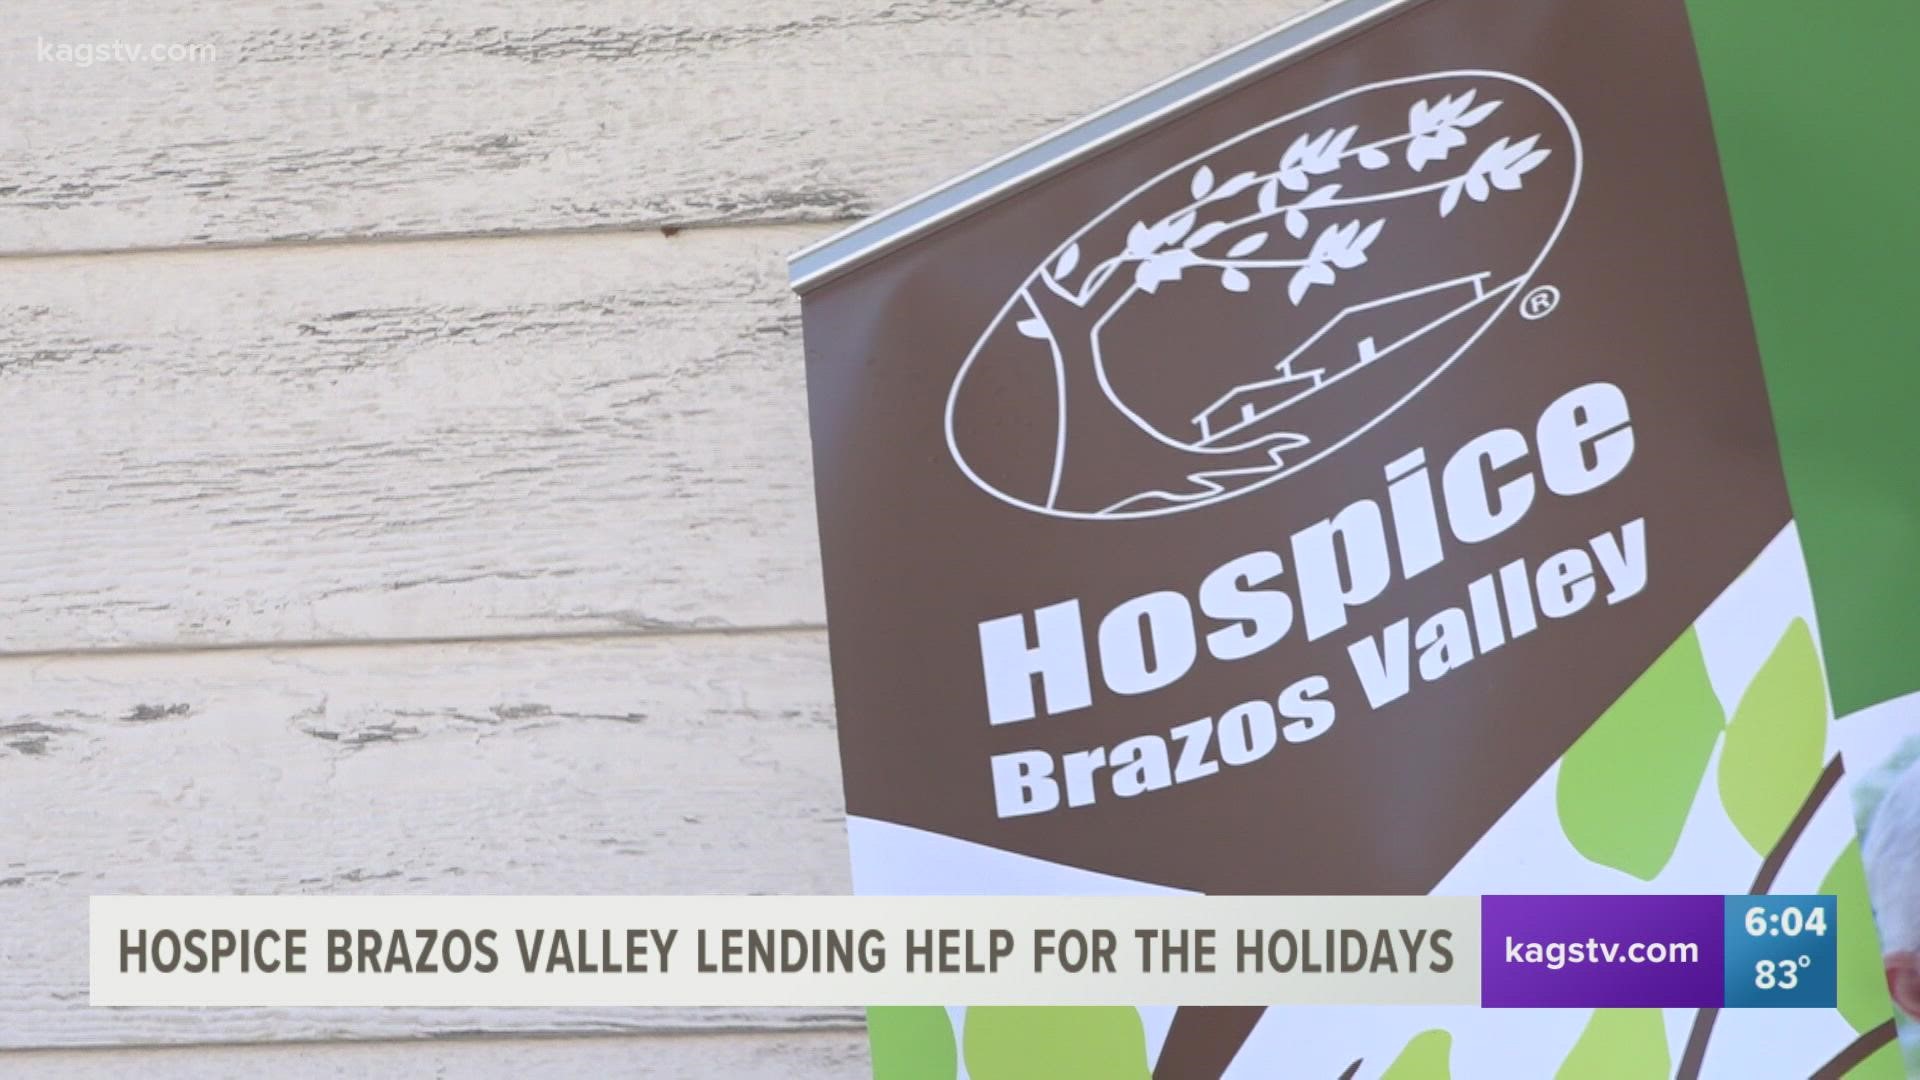 Hospice Brazos Valley and other organizations got together to help families have a great Thanksgiving